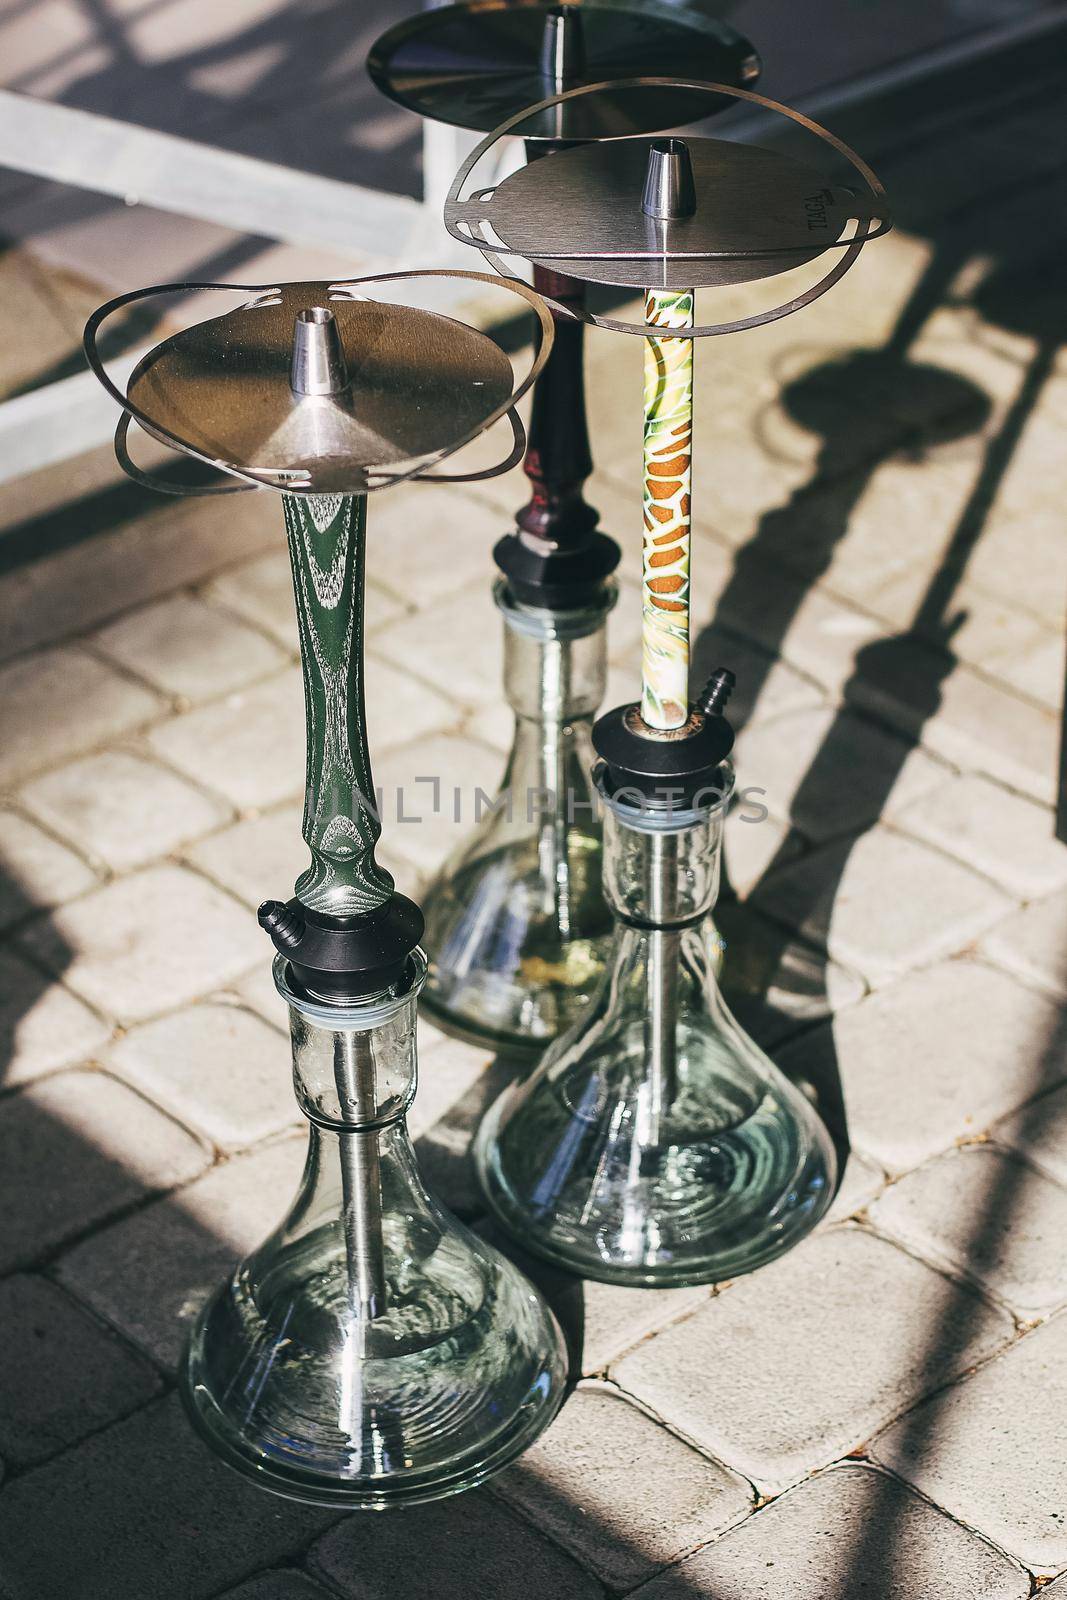 Hookah details for smoking and leisure in natural light by mmp1206